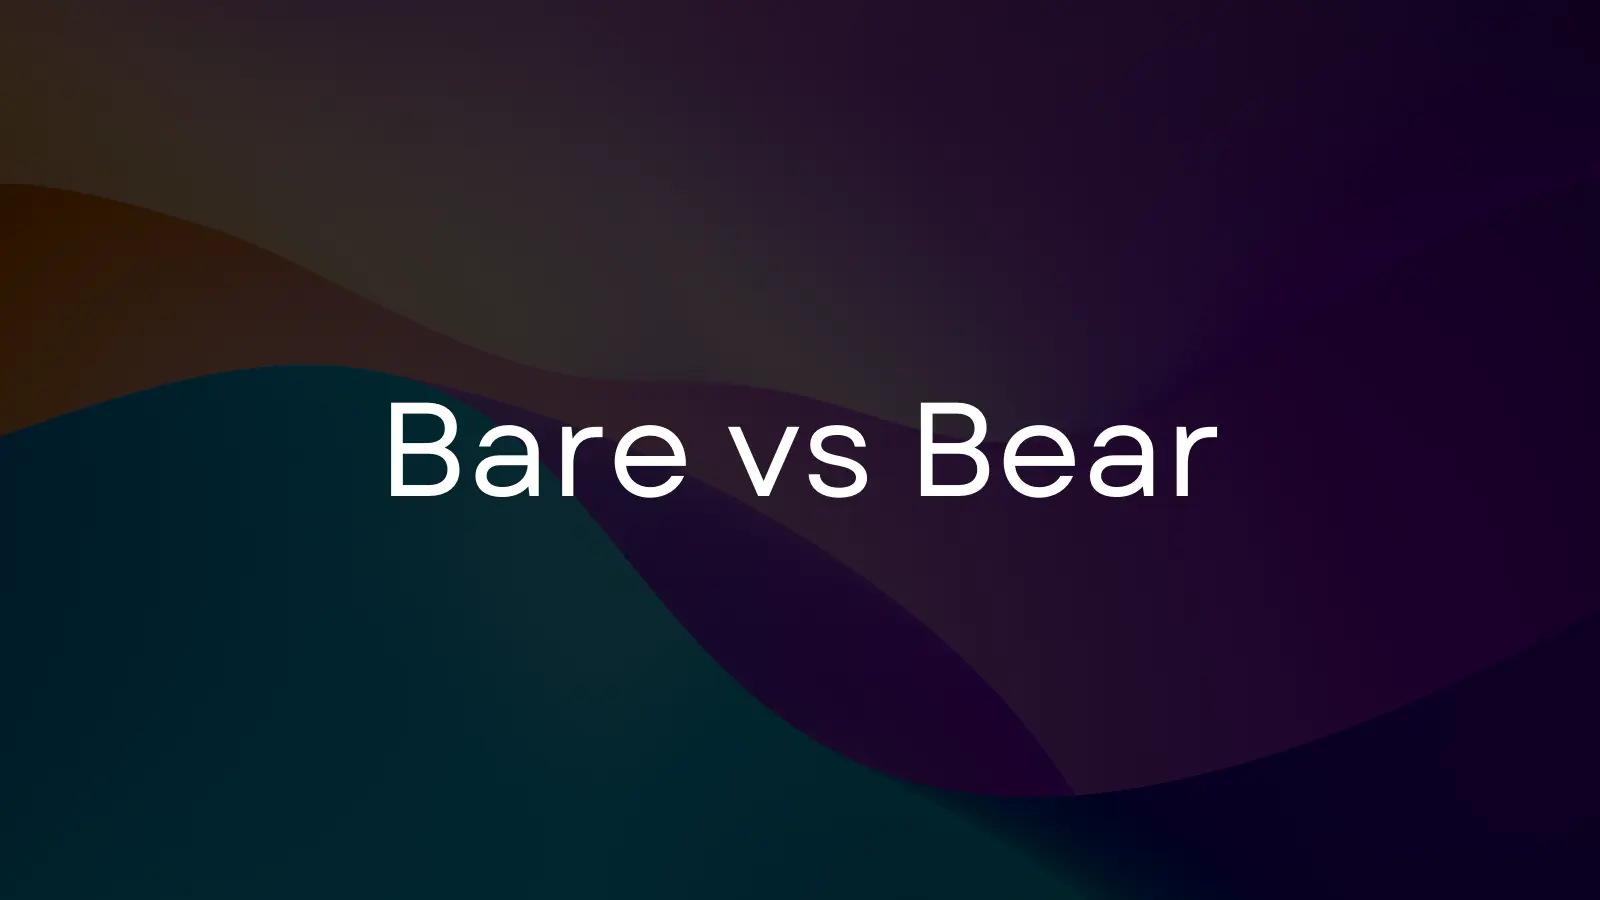 BARE in mind vs. BEAR in mind: Which one is correct? ✓